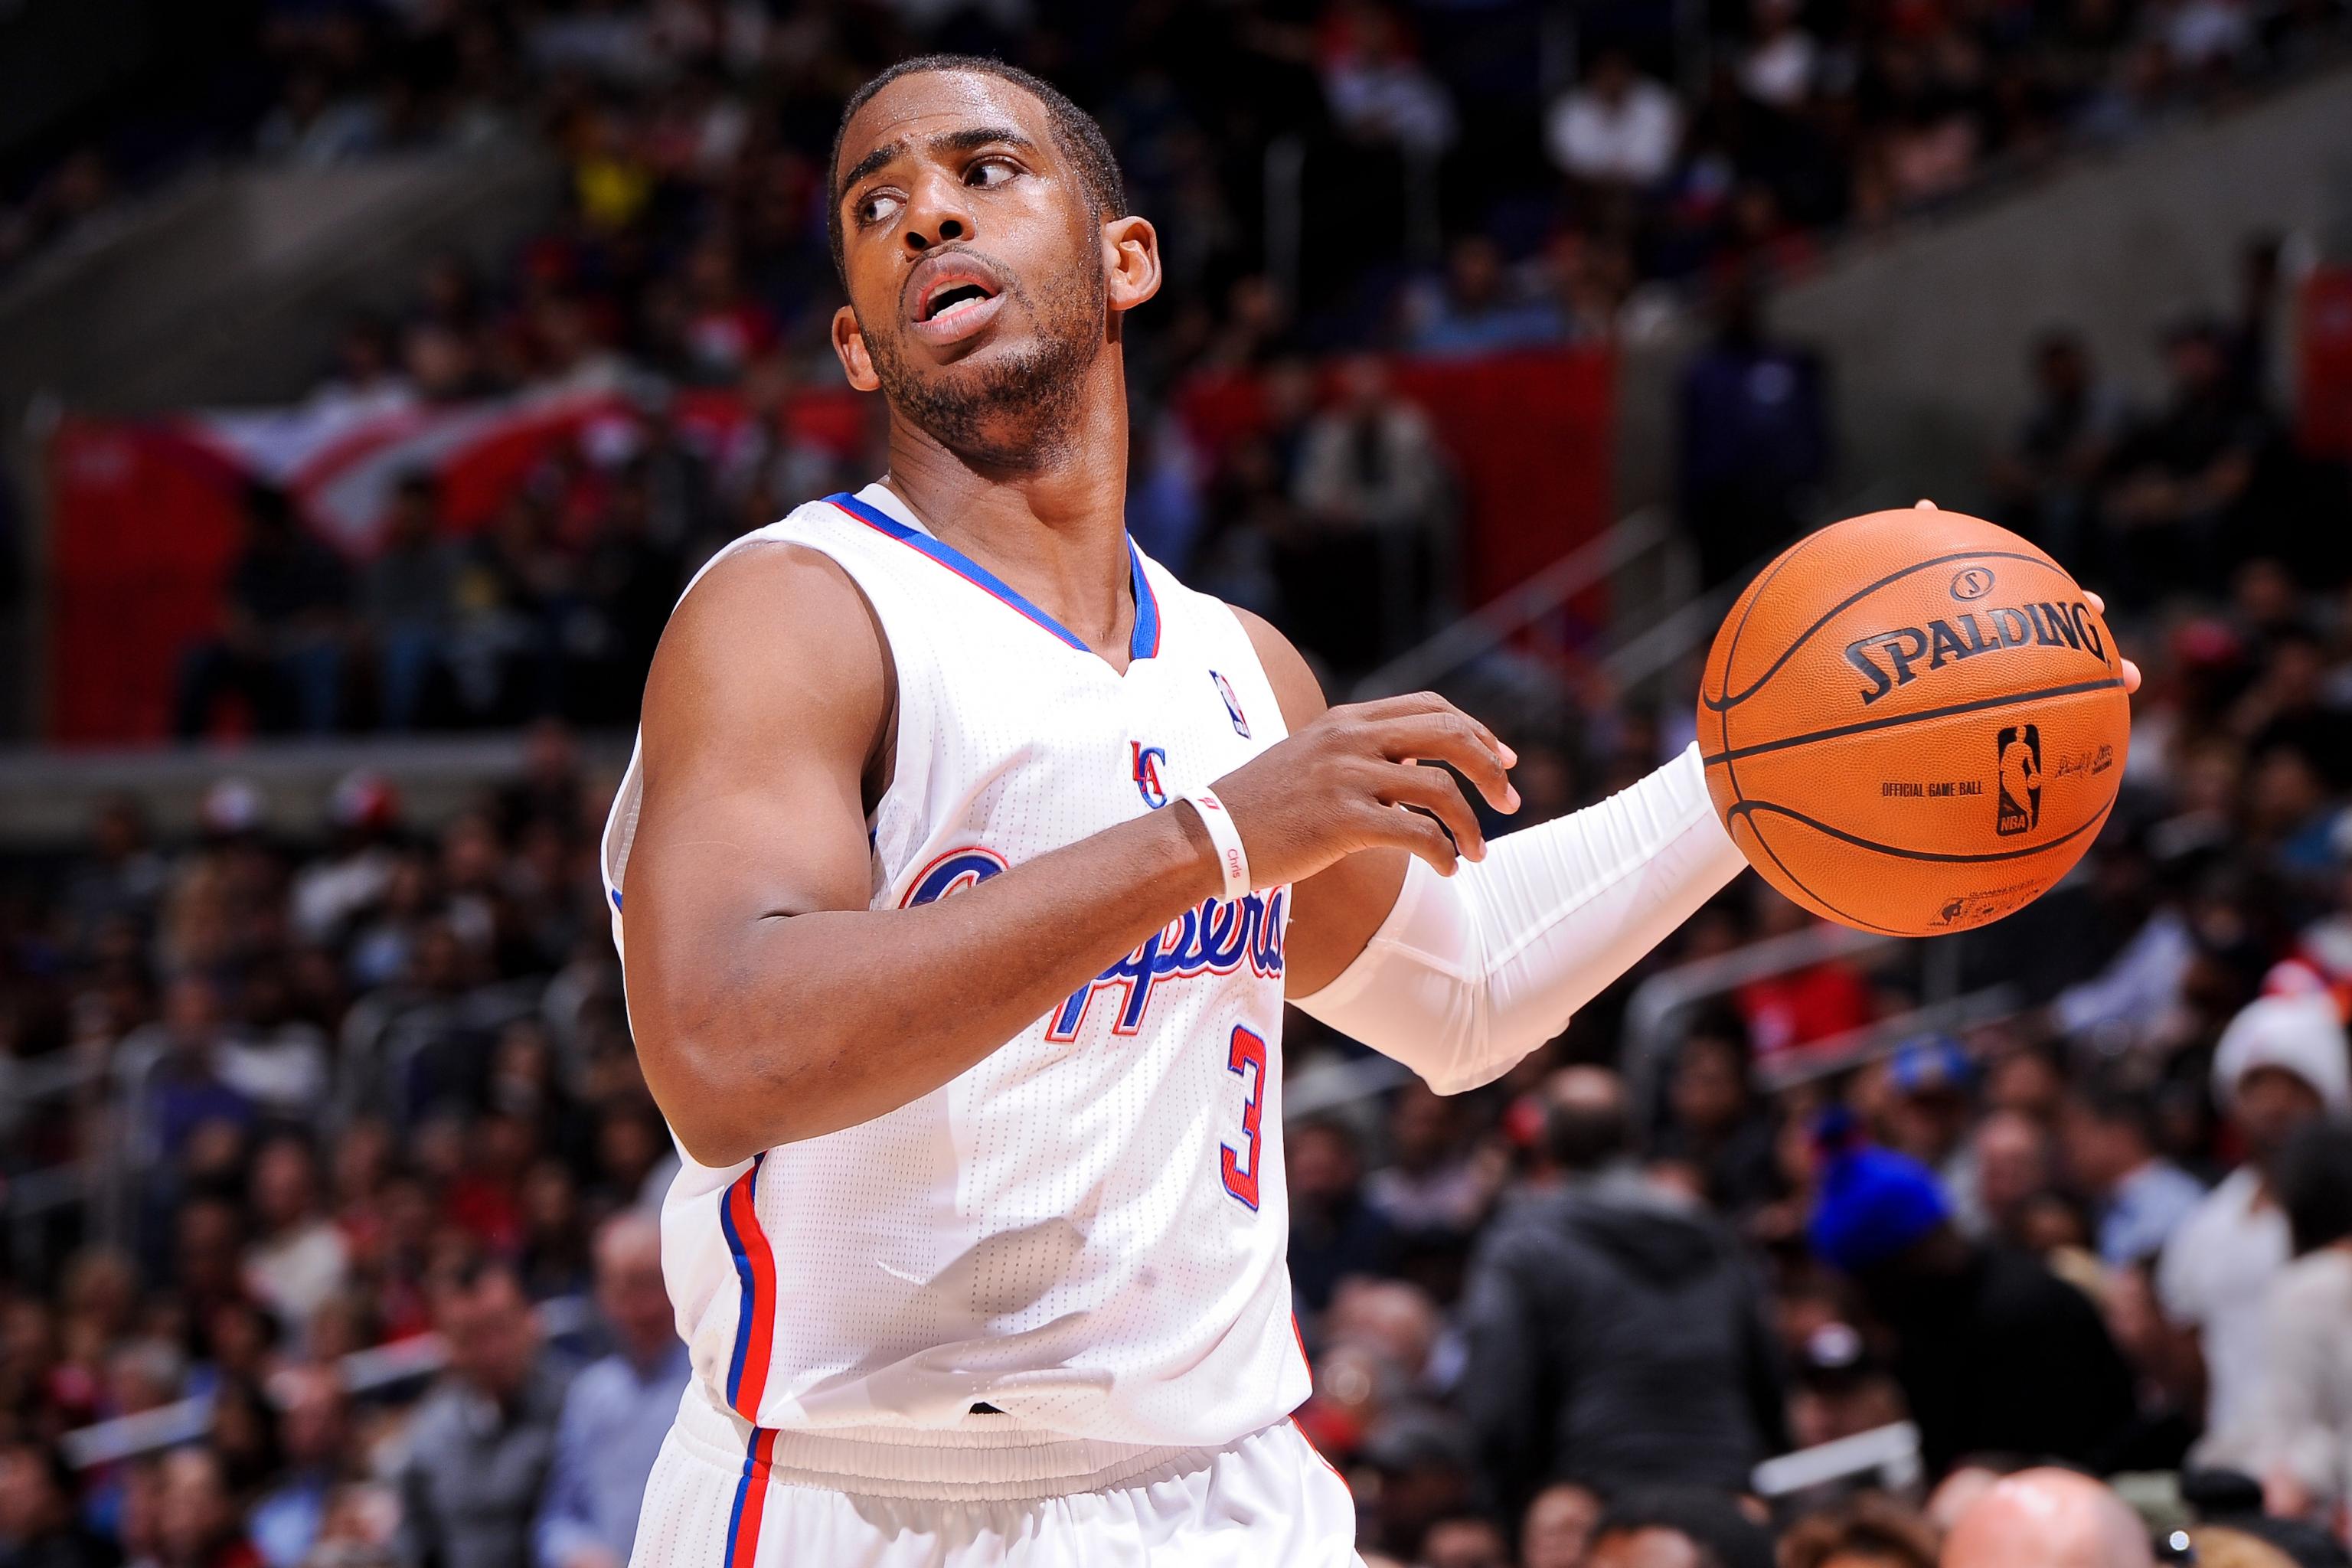 Chris Paul back amid quieter offseason for 'Lob City' Clippers